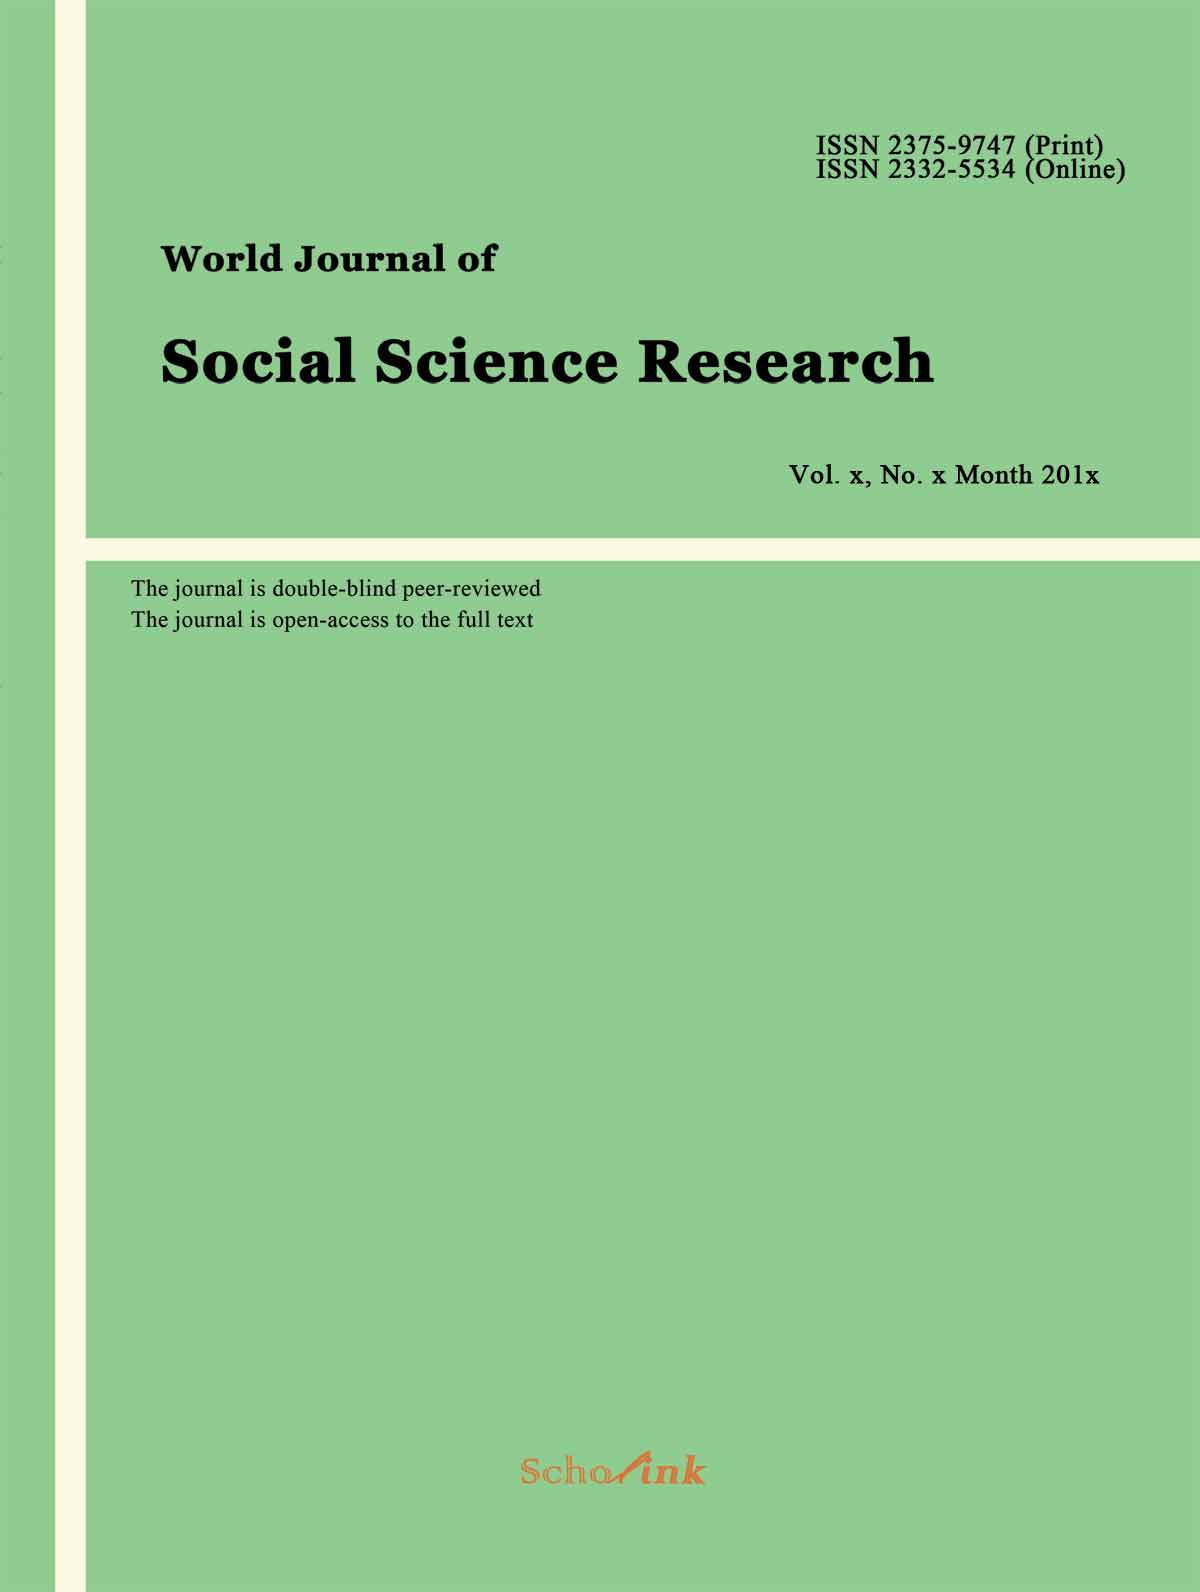 World Journal of Social Science Research